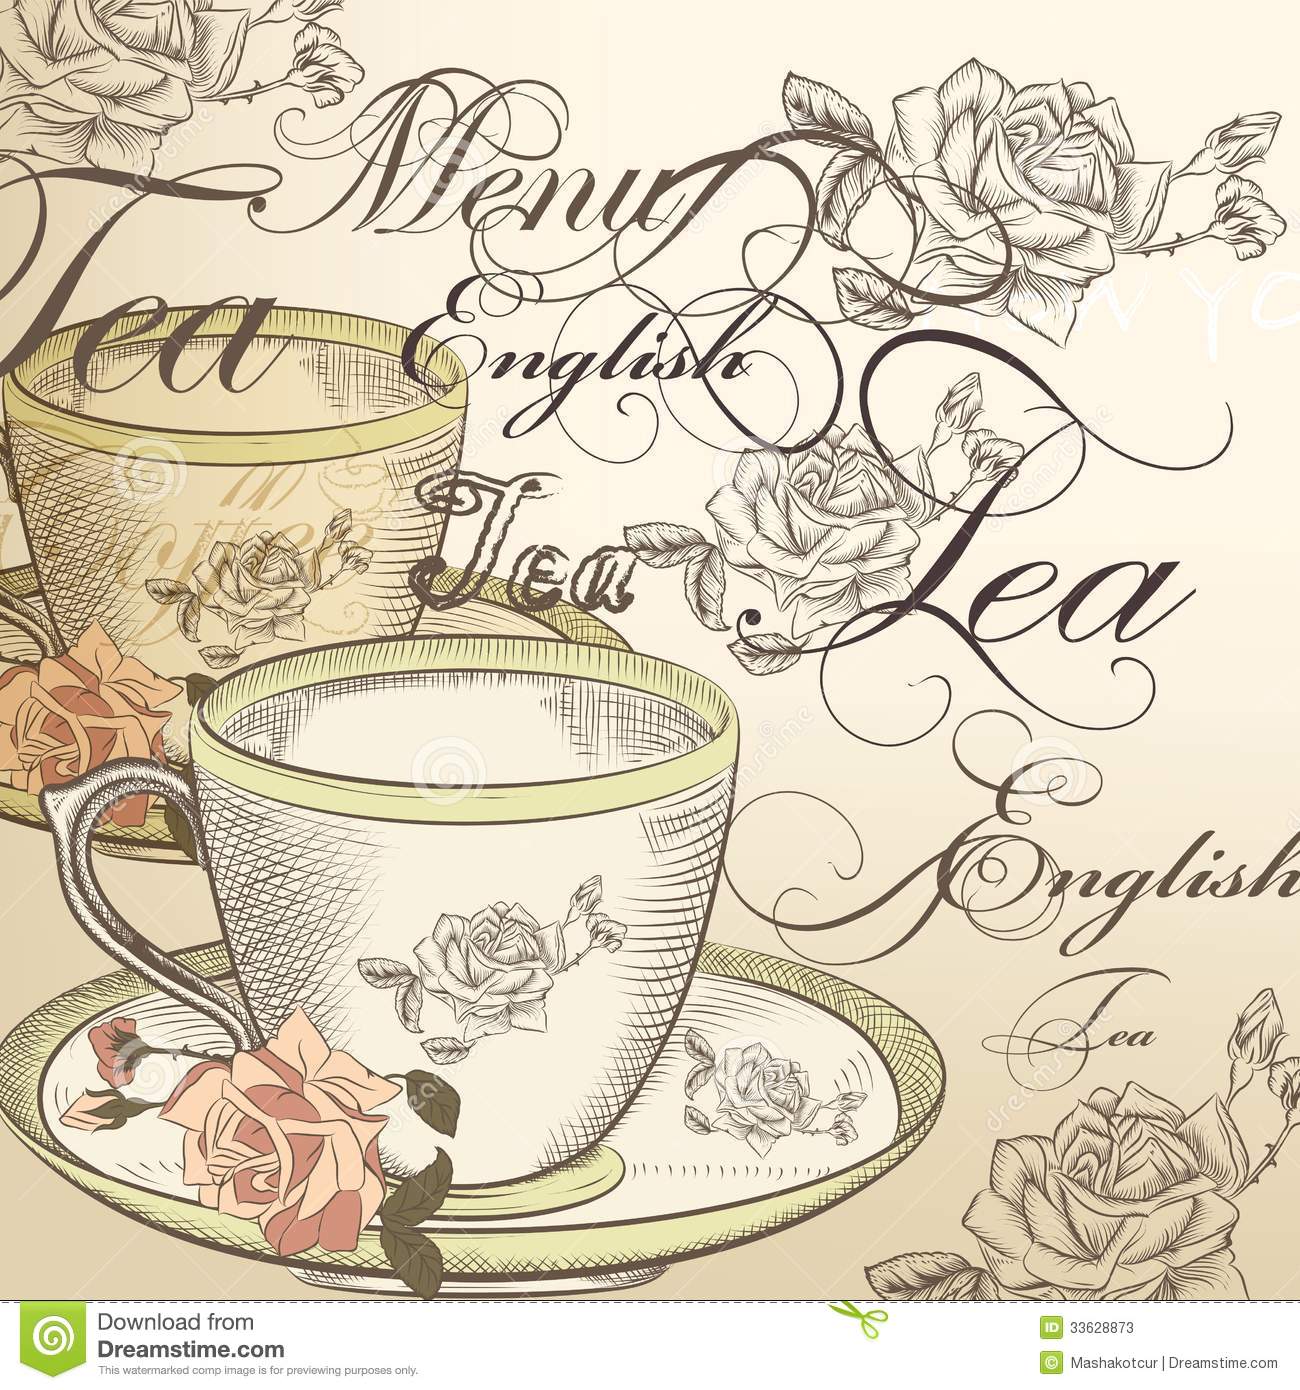     With Cup Of Tea And Roses In Vintage Stock Photos   Image  33628873